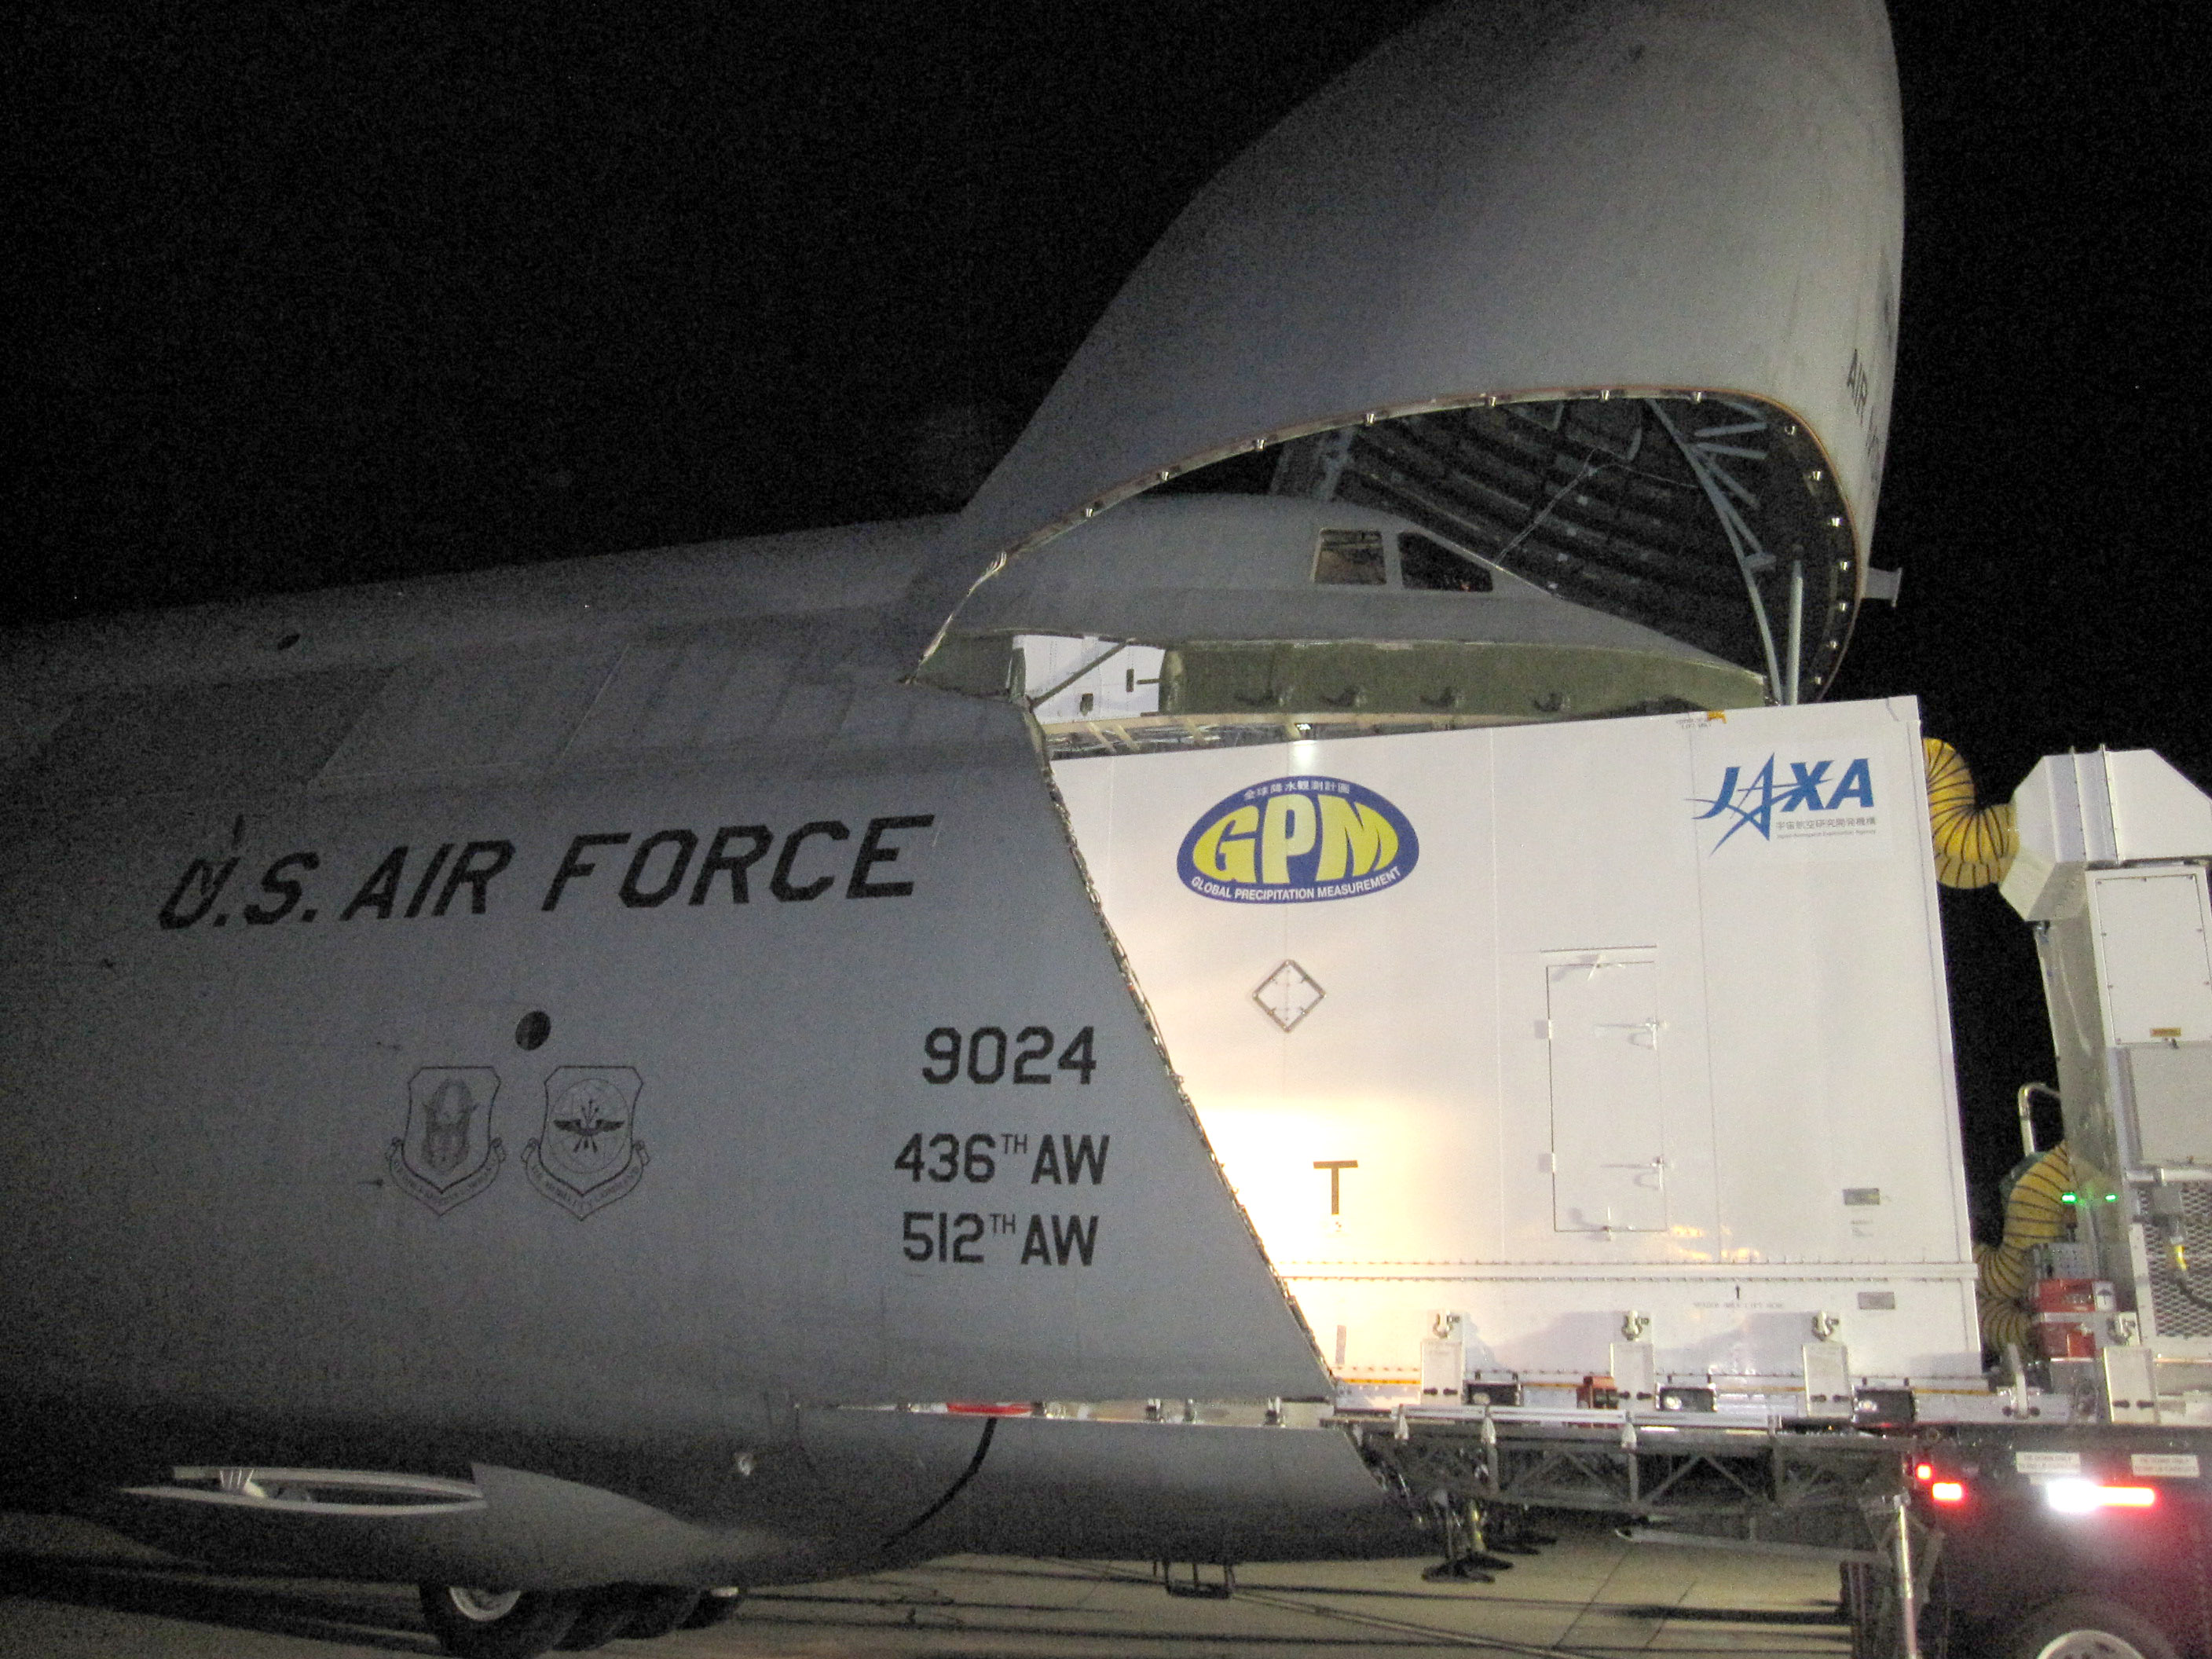 Loading GPM into the C5 Aircraft